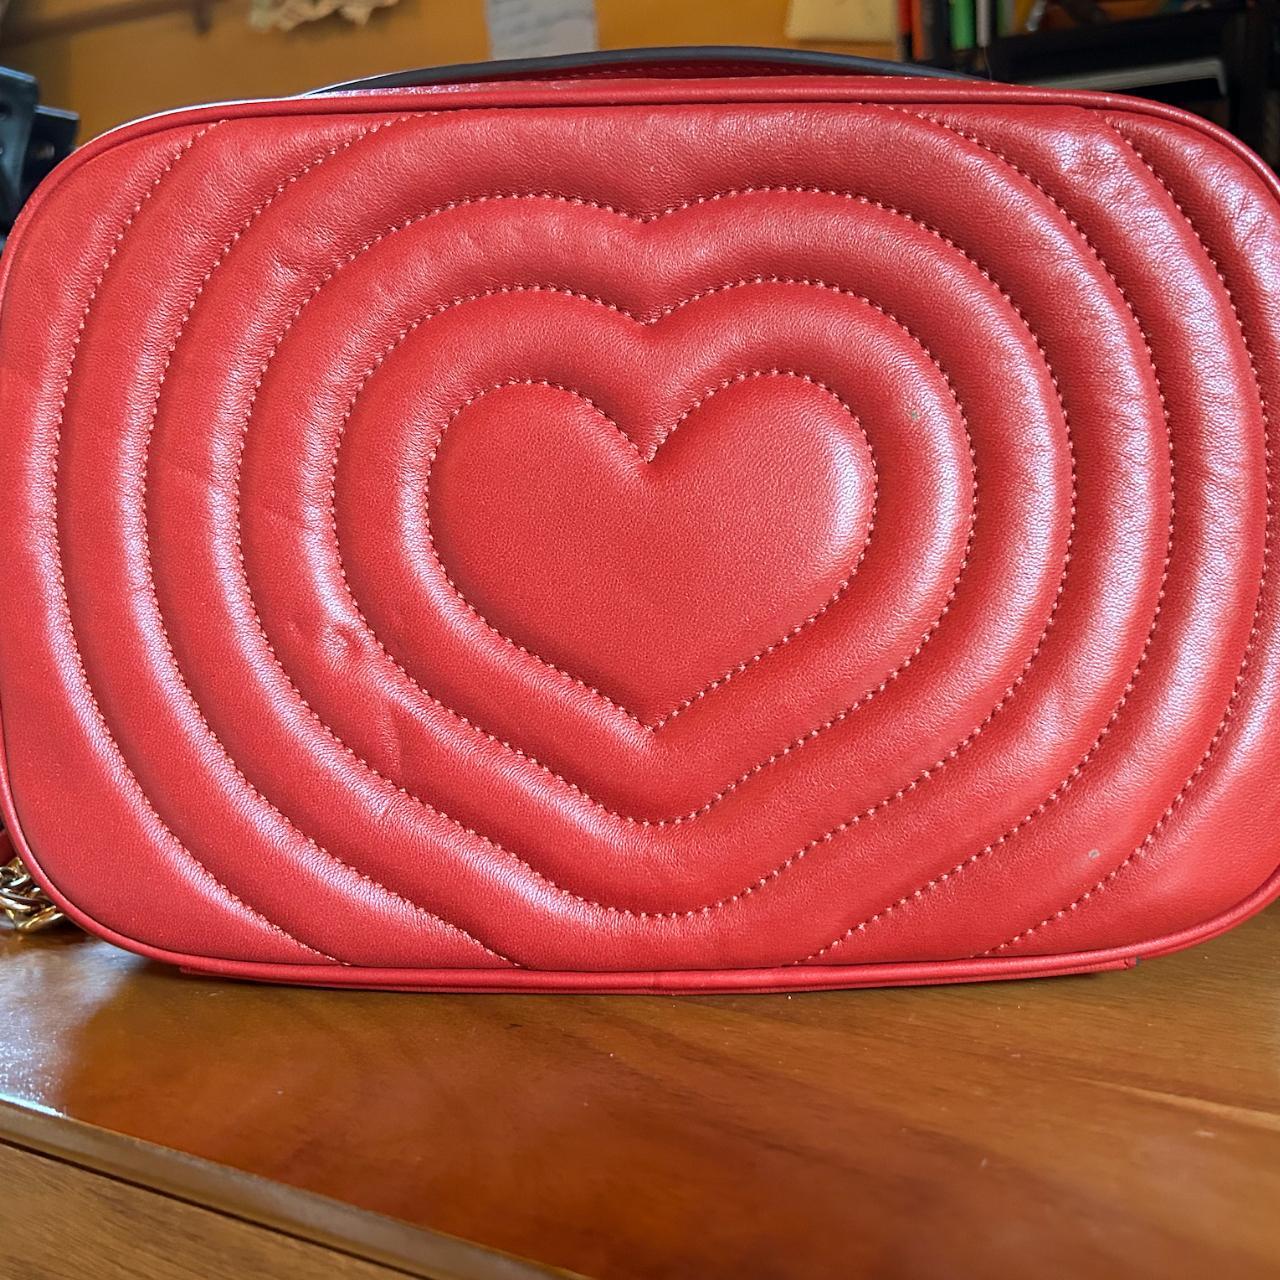 Red Coach crossbody bag with heart quilting on front - Depop